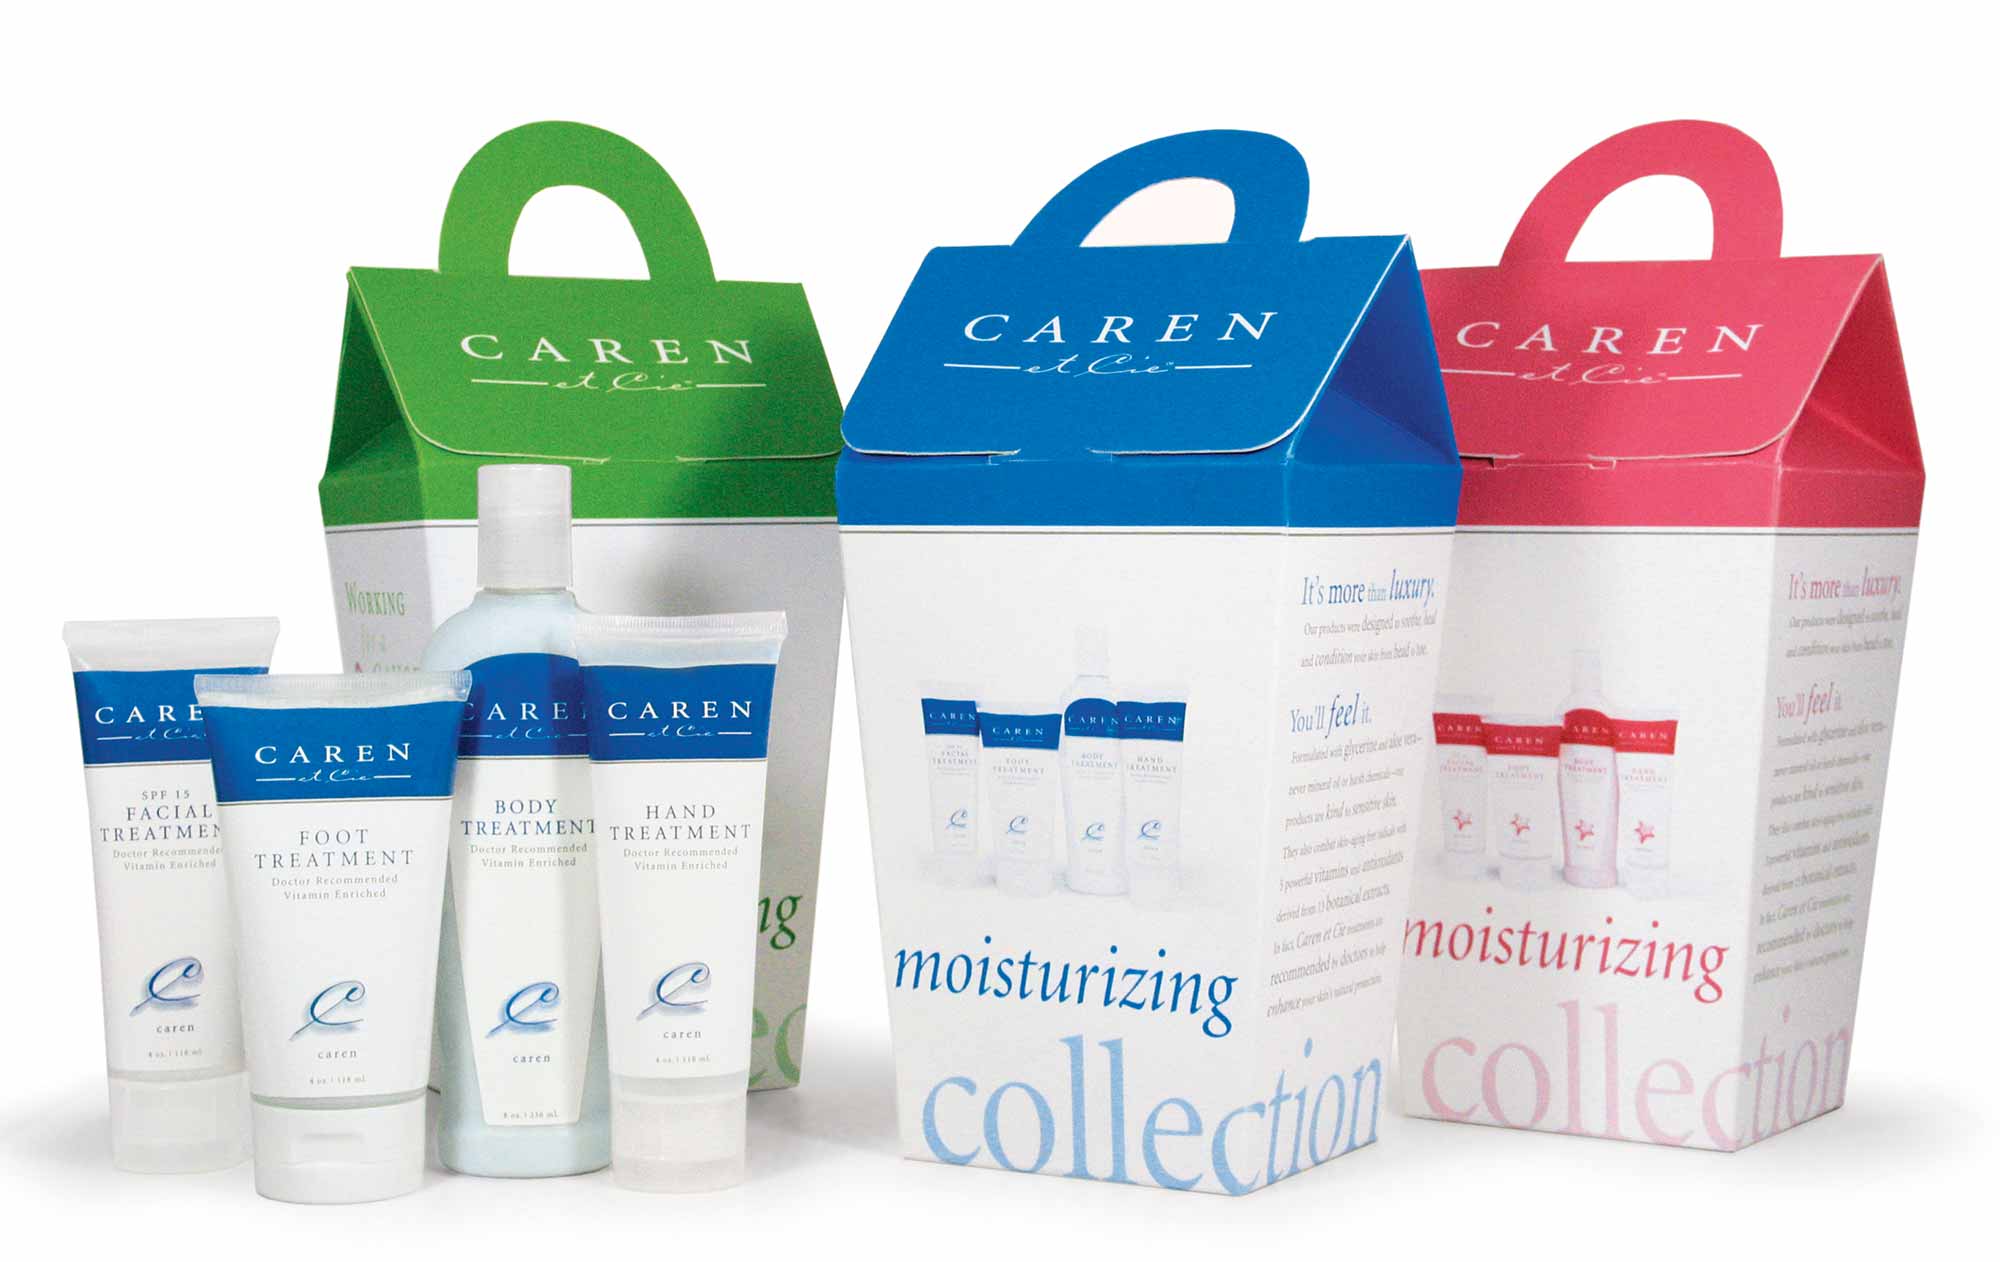 Caren Products gift set photography